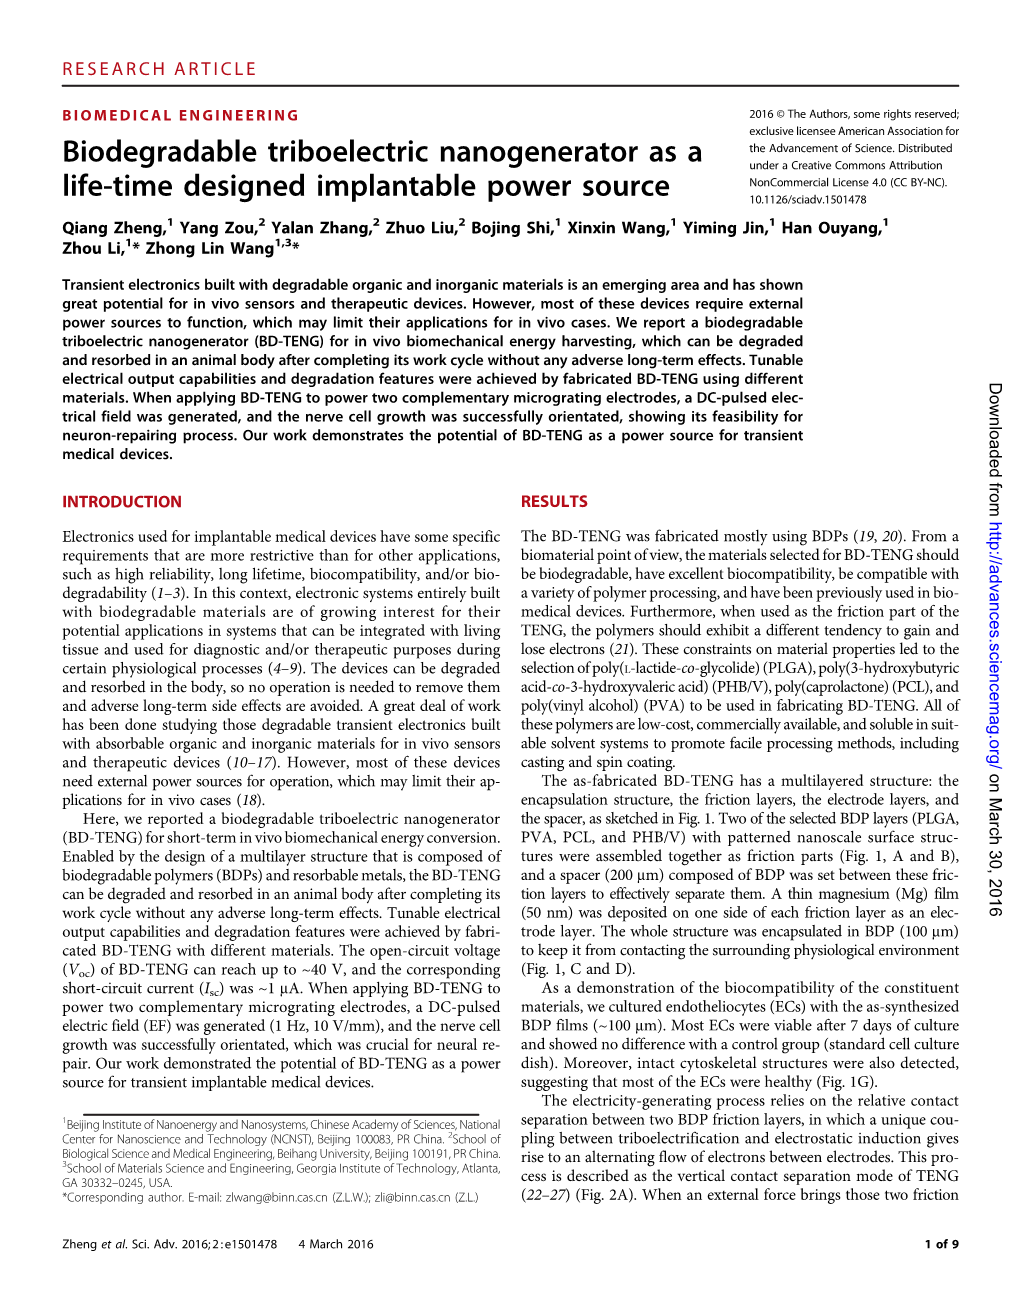 Biodegradable Triboelectric Nanogenerator As a Life-Time Designed Implantable Power Source